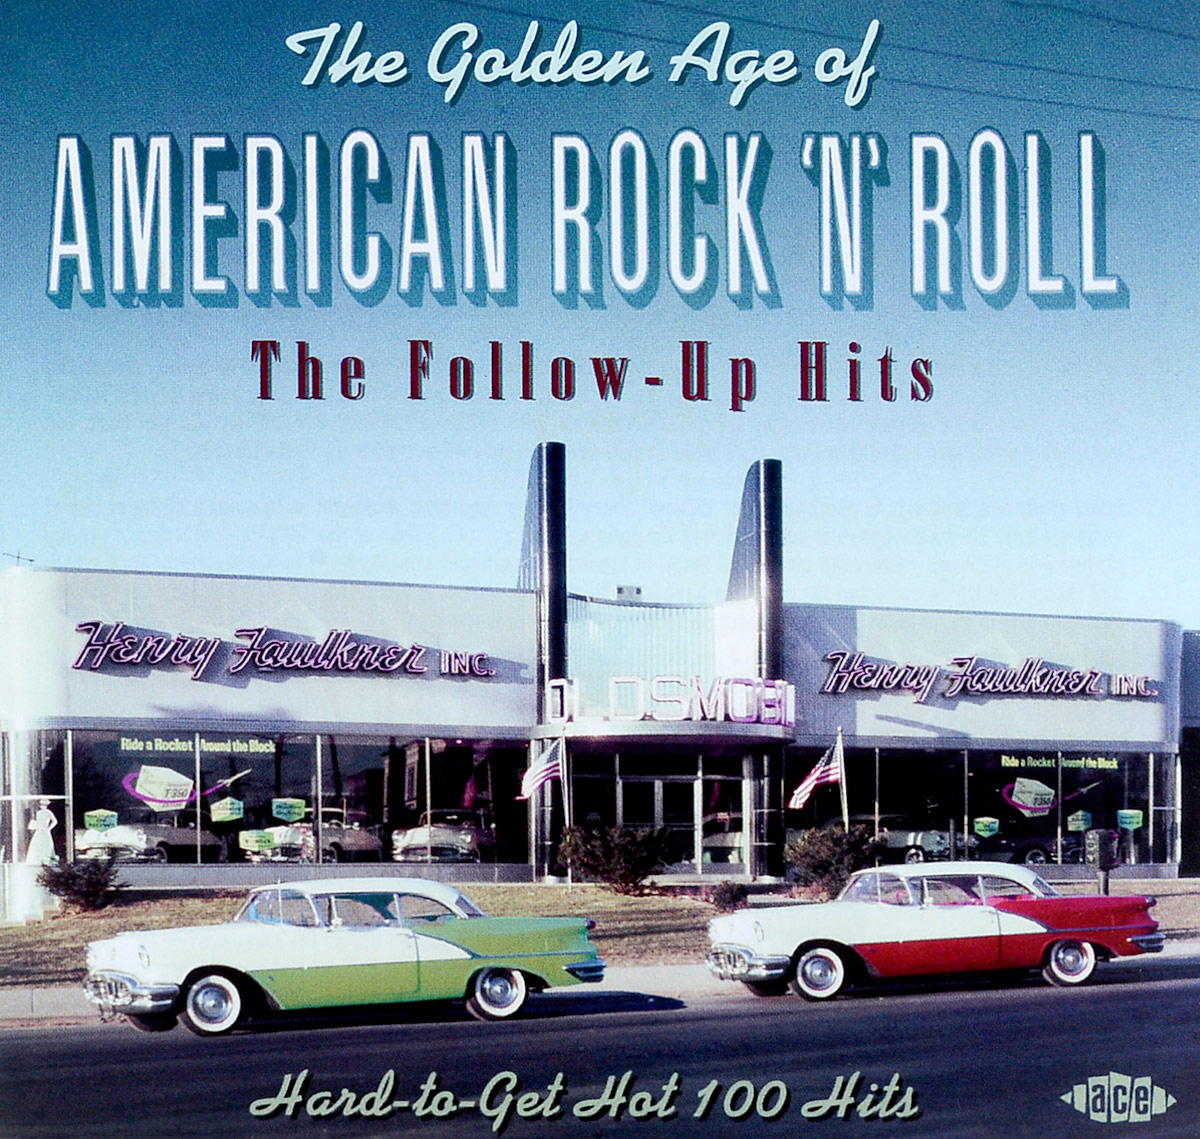 The Golden Age Of American Rock’n’roll:The Follow-Up Hits